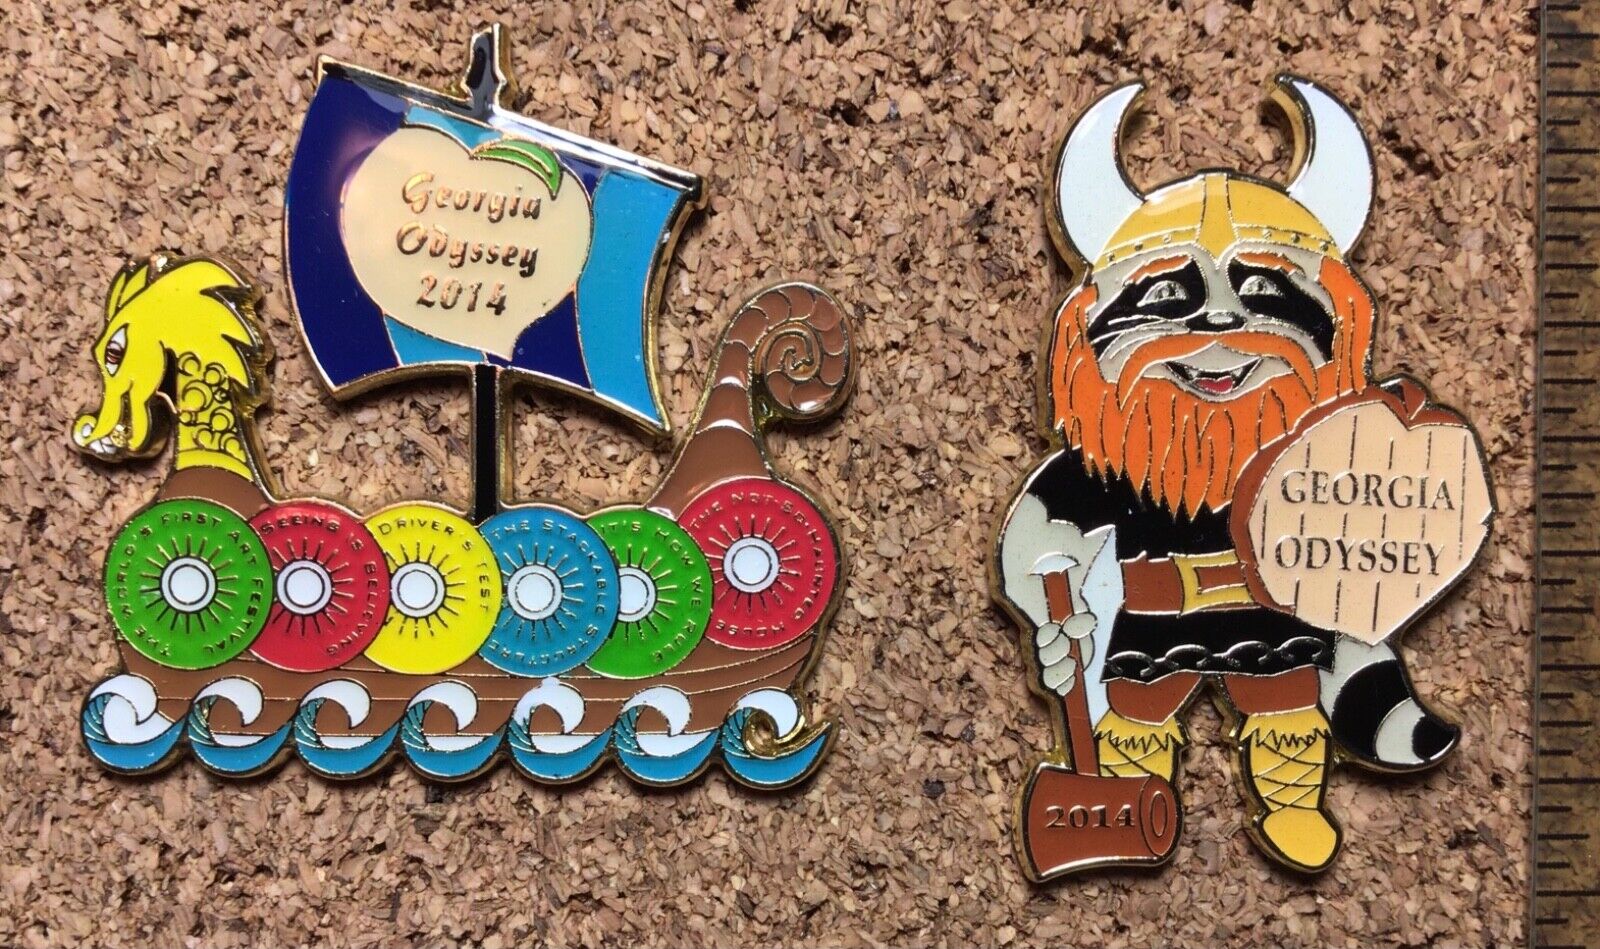 Georgia 2014 Odyssey of the Mind World Finals - 2 Pin Set - OMER Viking and Ship